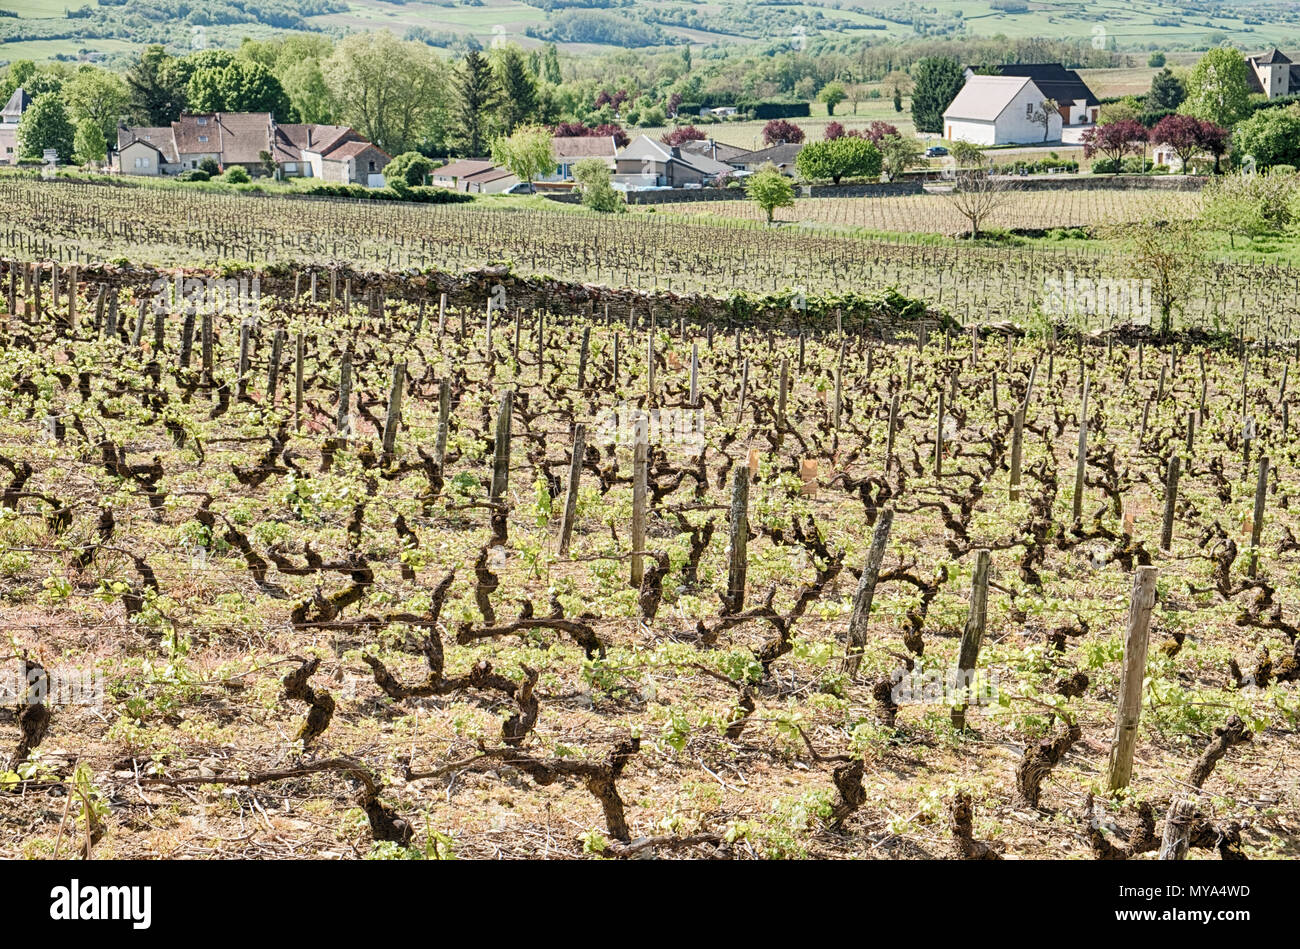 A vineyard with a stone wall lies within the village of Santenay in the Burgundy region of France. Stock Photo